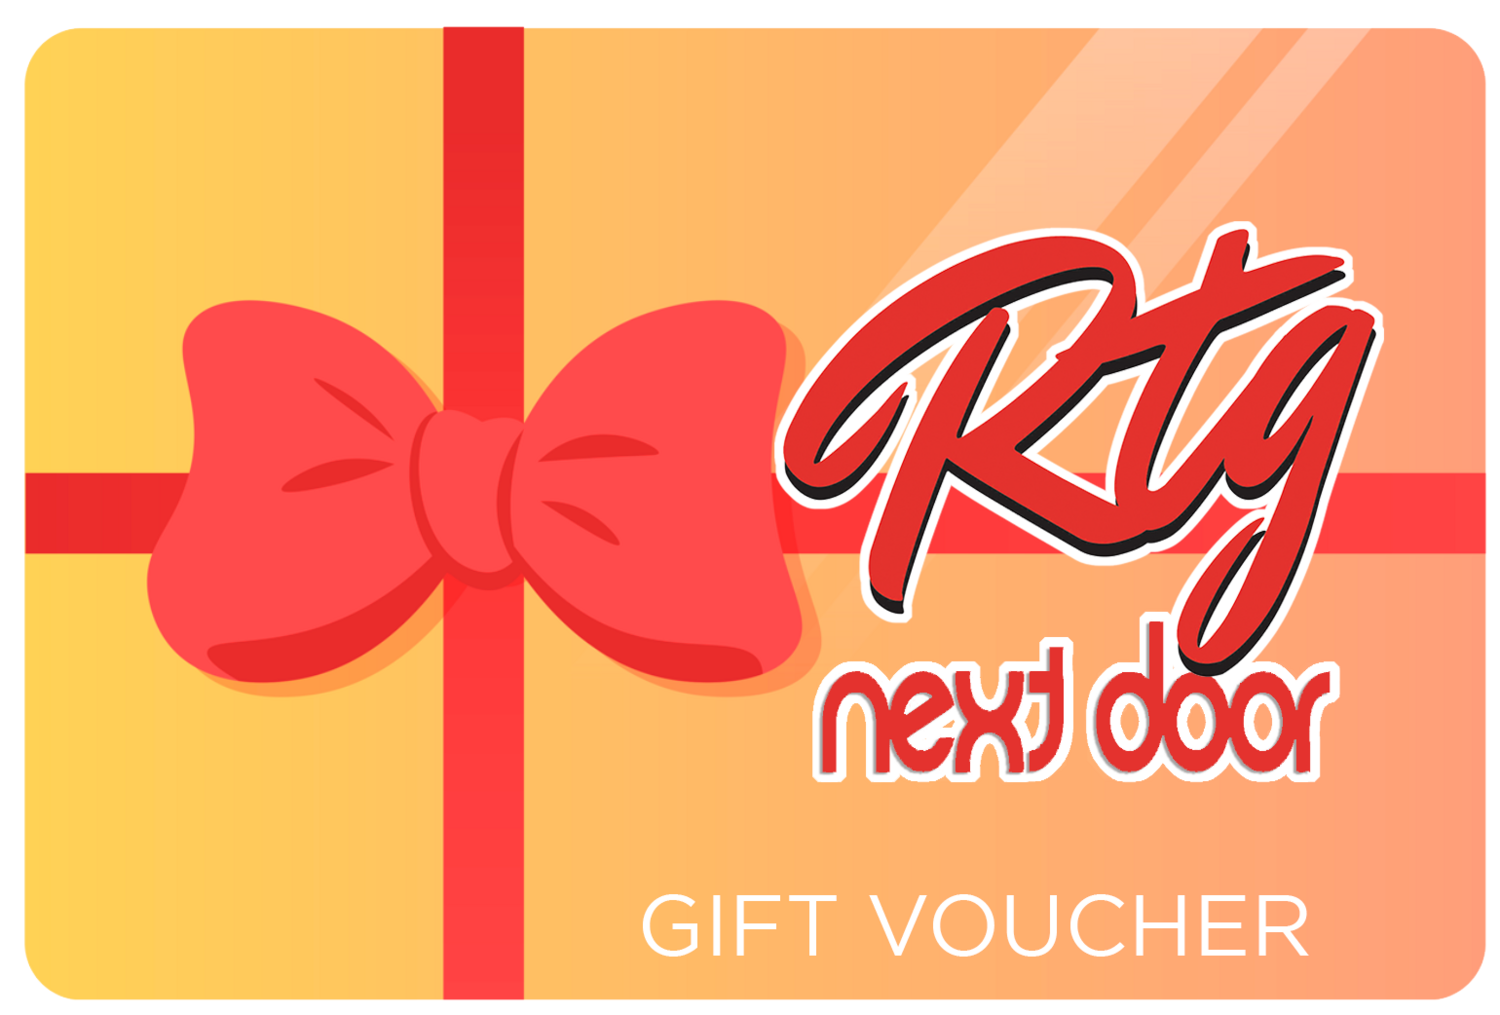 Send an electronic gift card to friends and family​